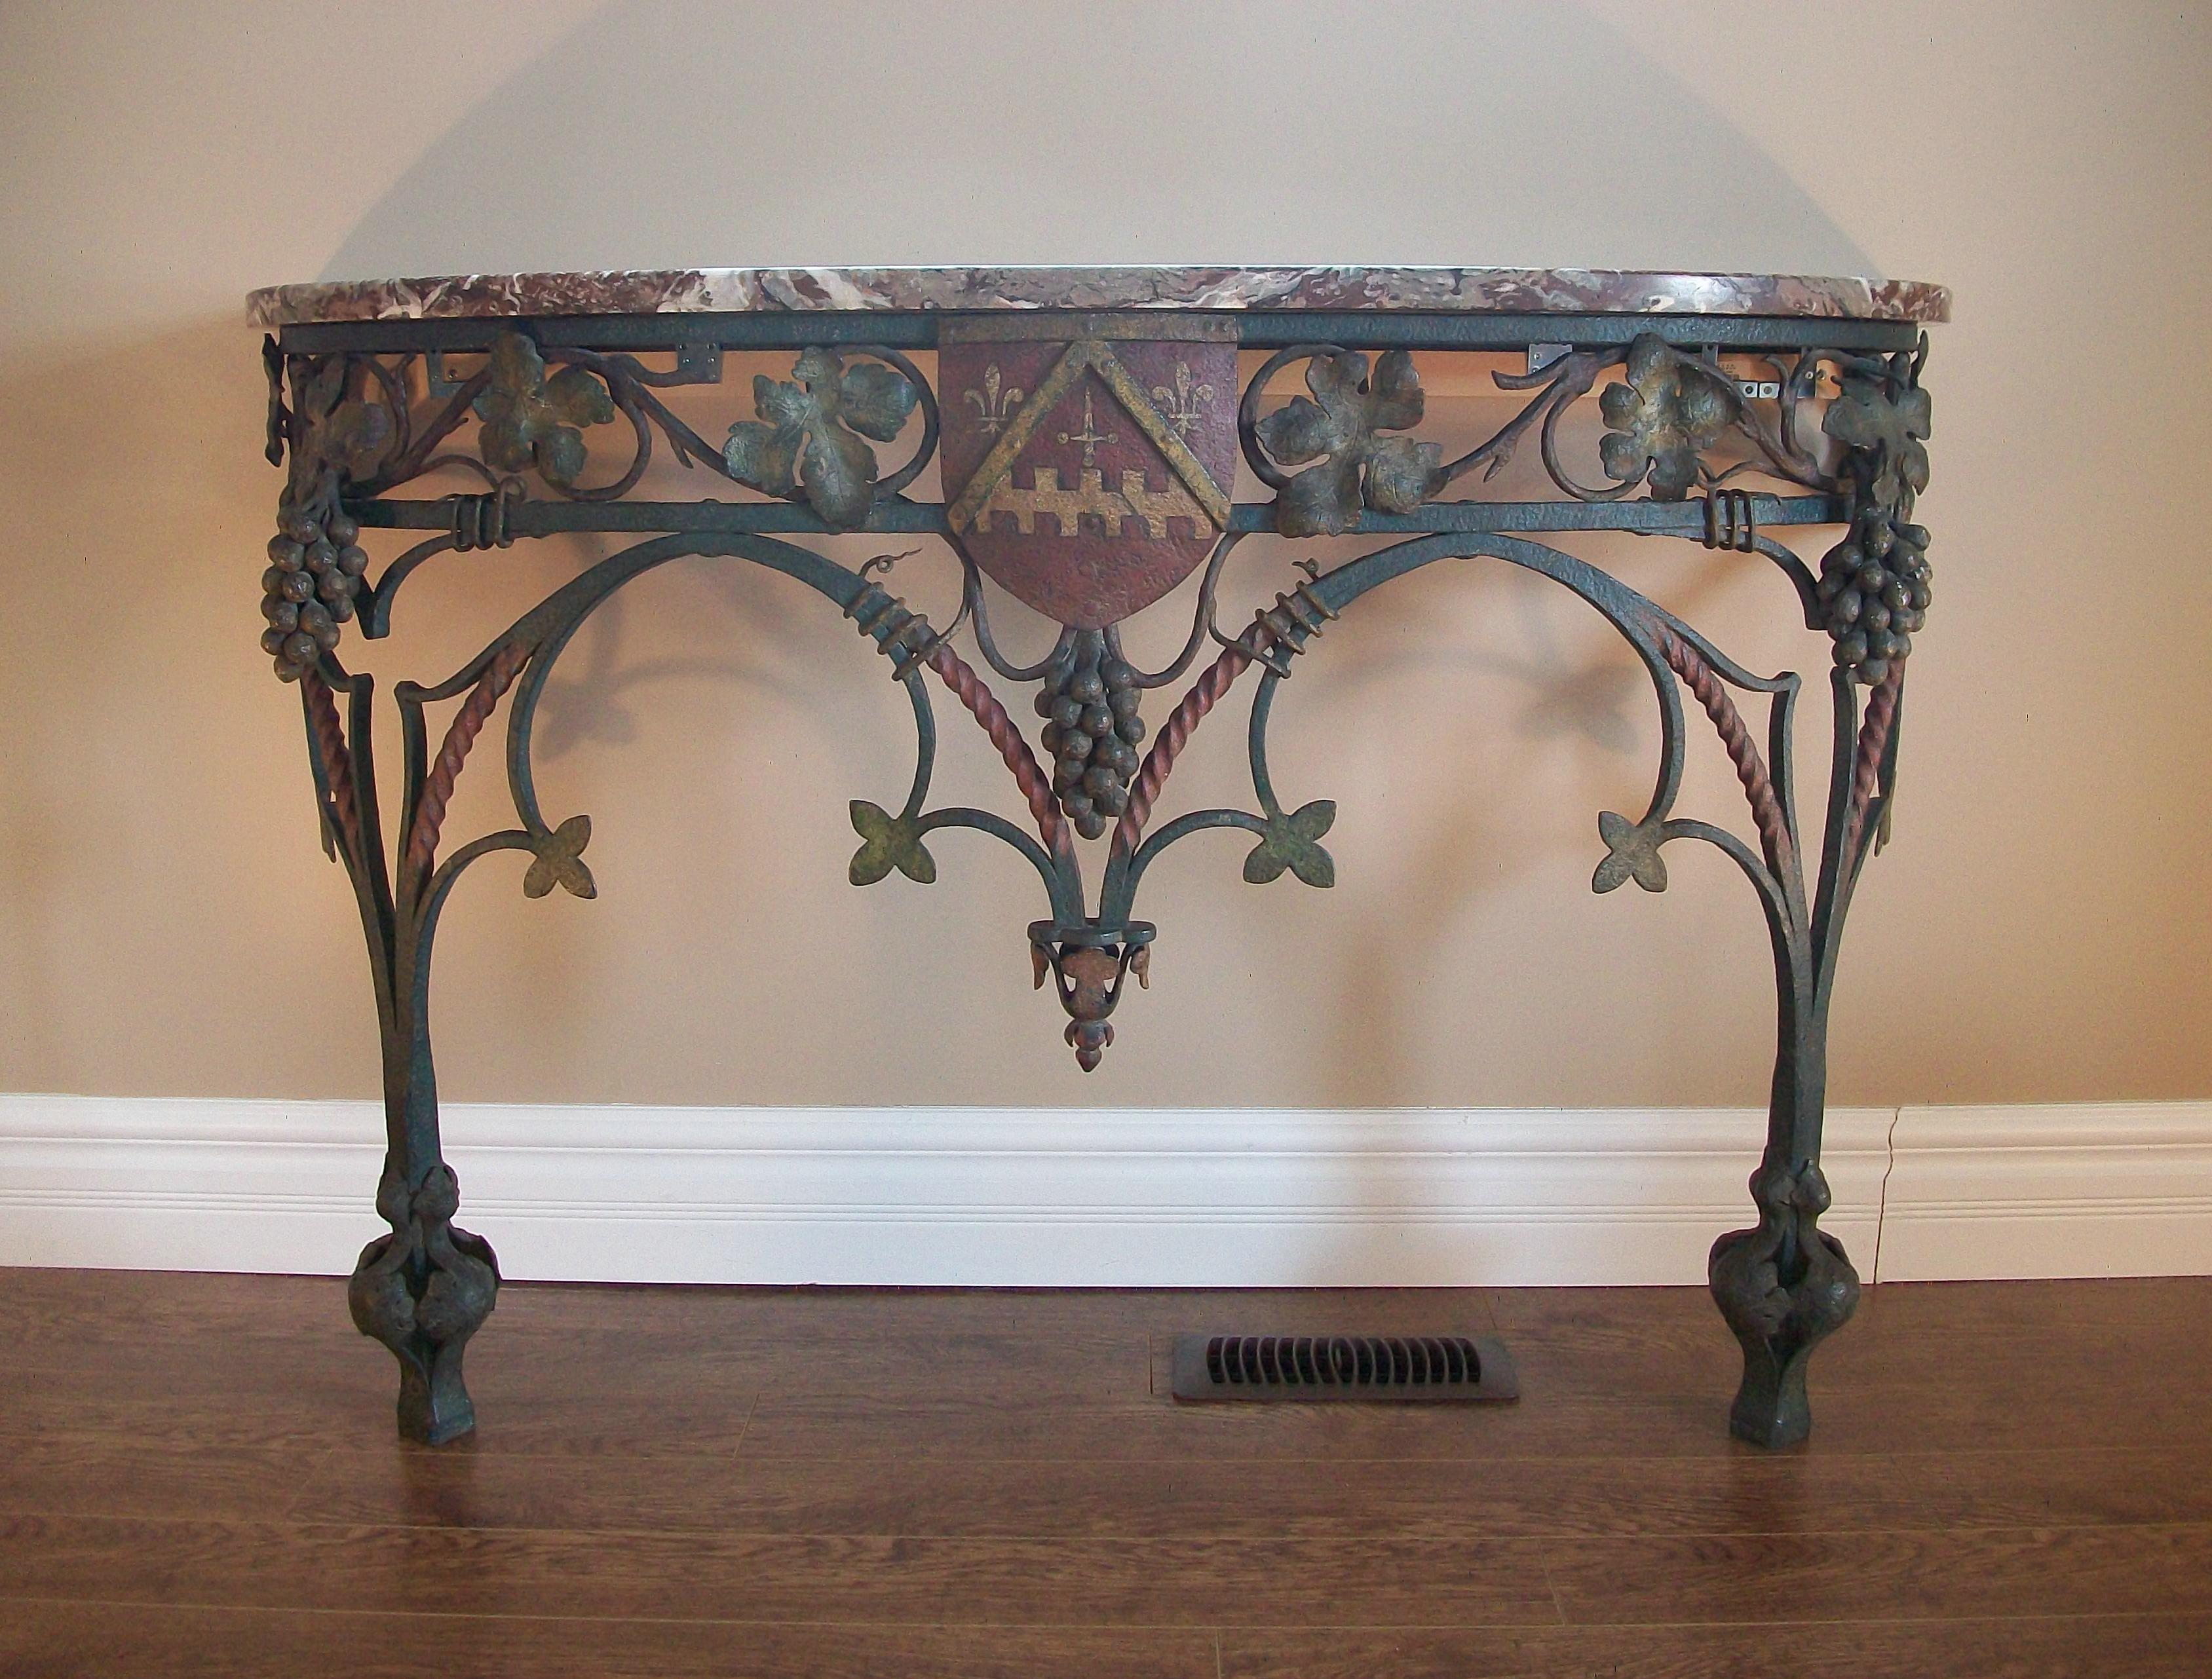 Exceptional and rare antique Neo Gothic wrought iron console table with family crest and original Rouge Royal marble top - riveted construction throughout - completely hand made - decorated with bunches of grapes (each grape individually hand